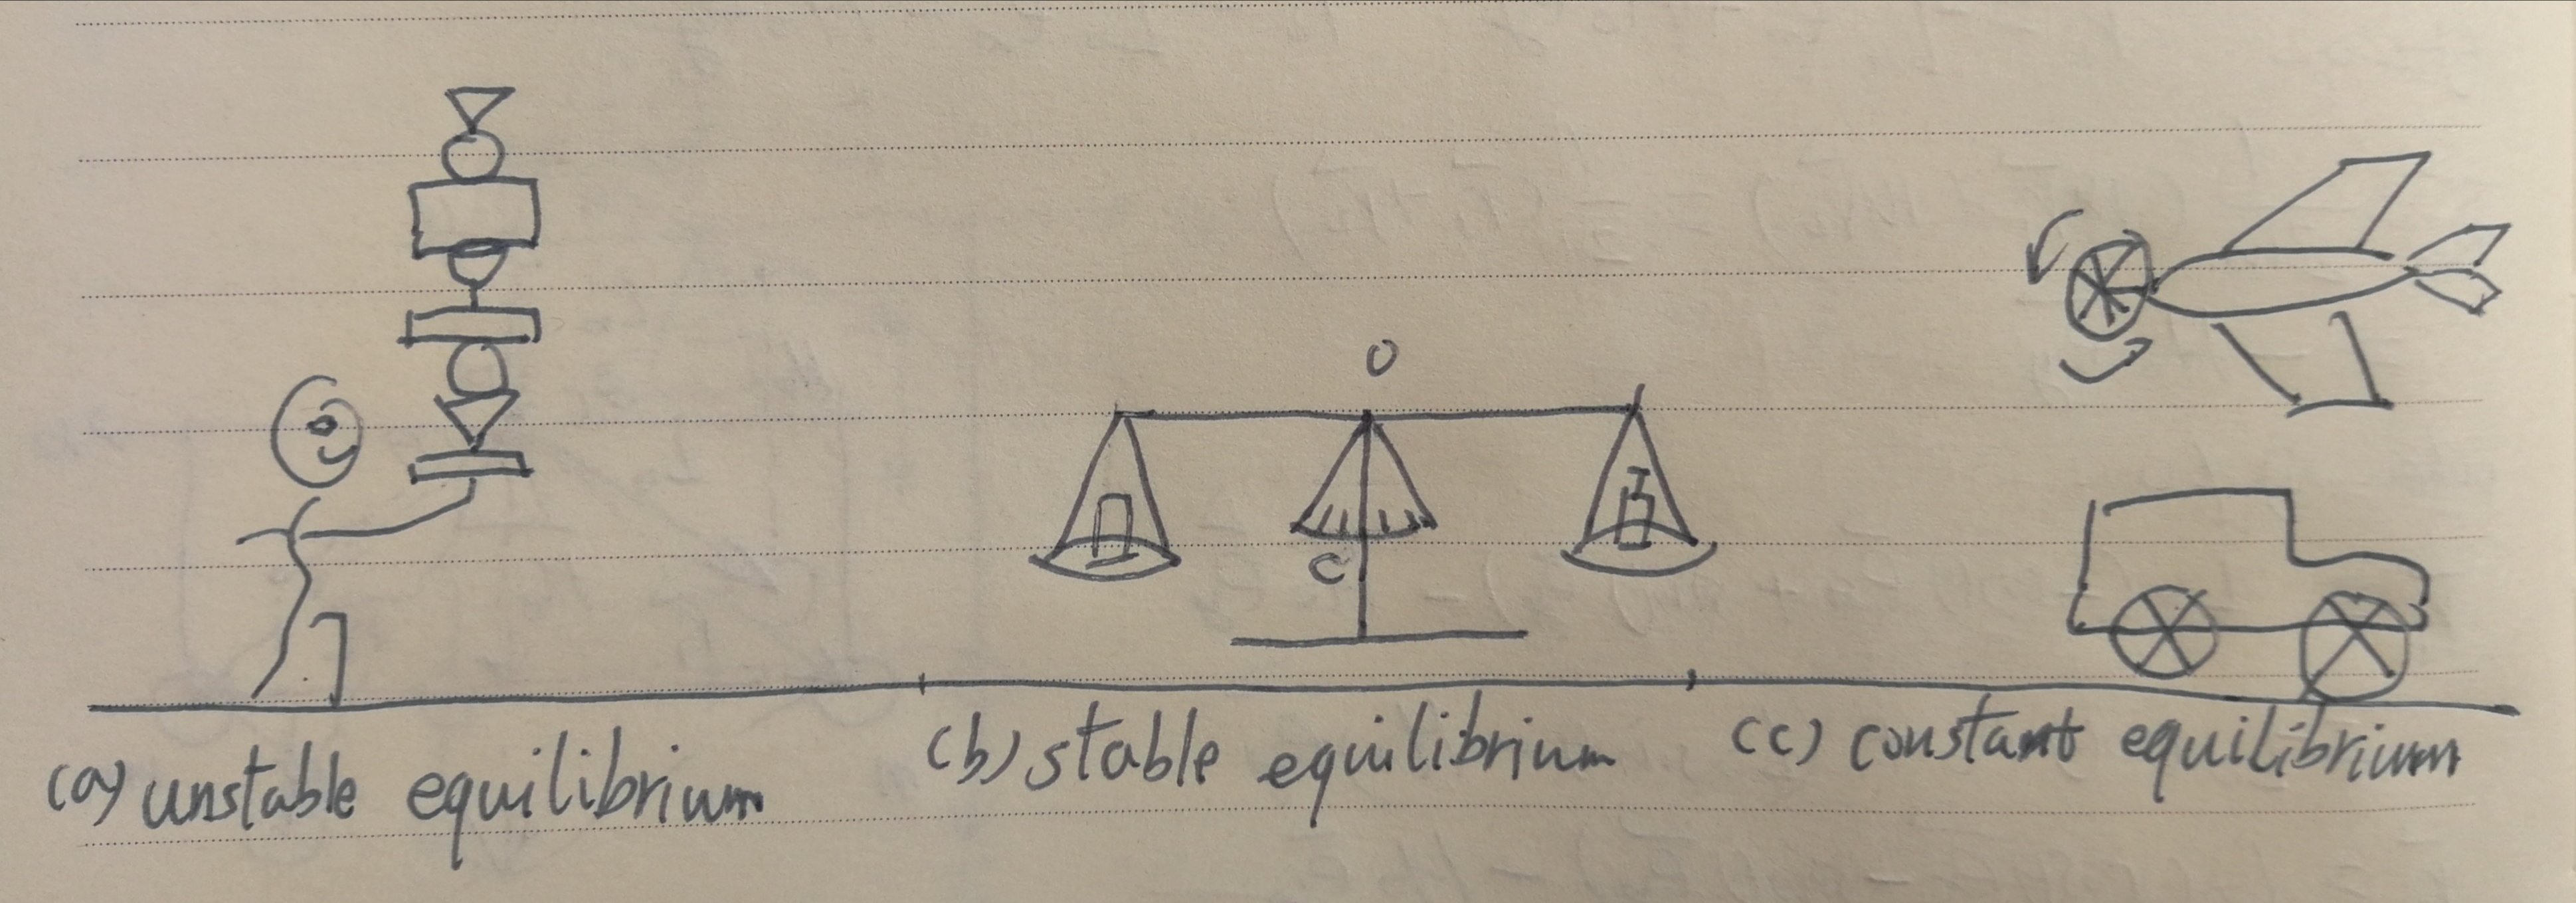 stabilities of equilibriums